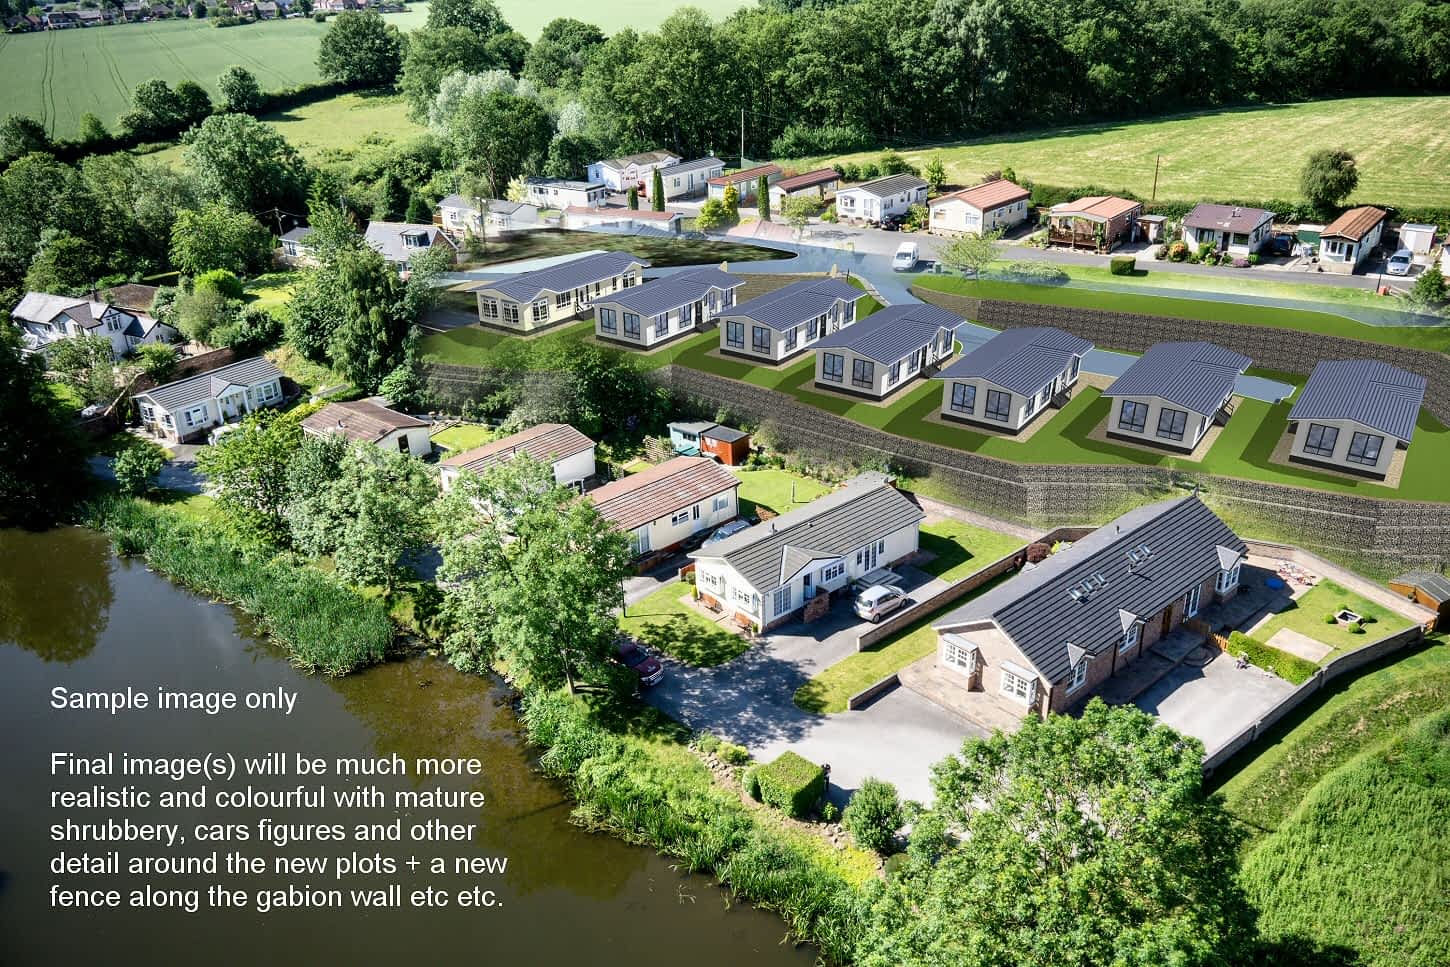 Brand new development of 7 new homes coming soon.